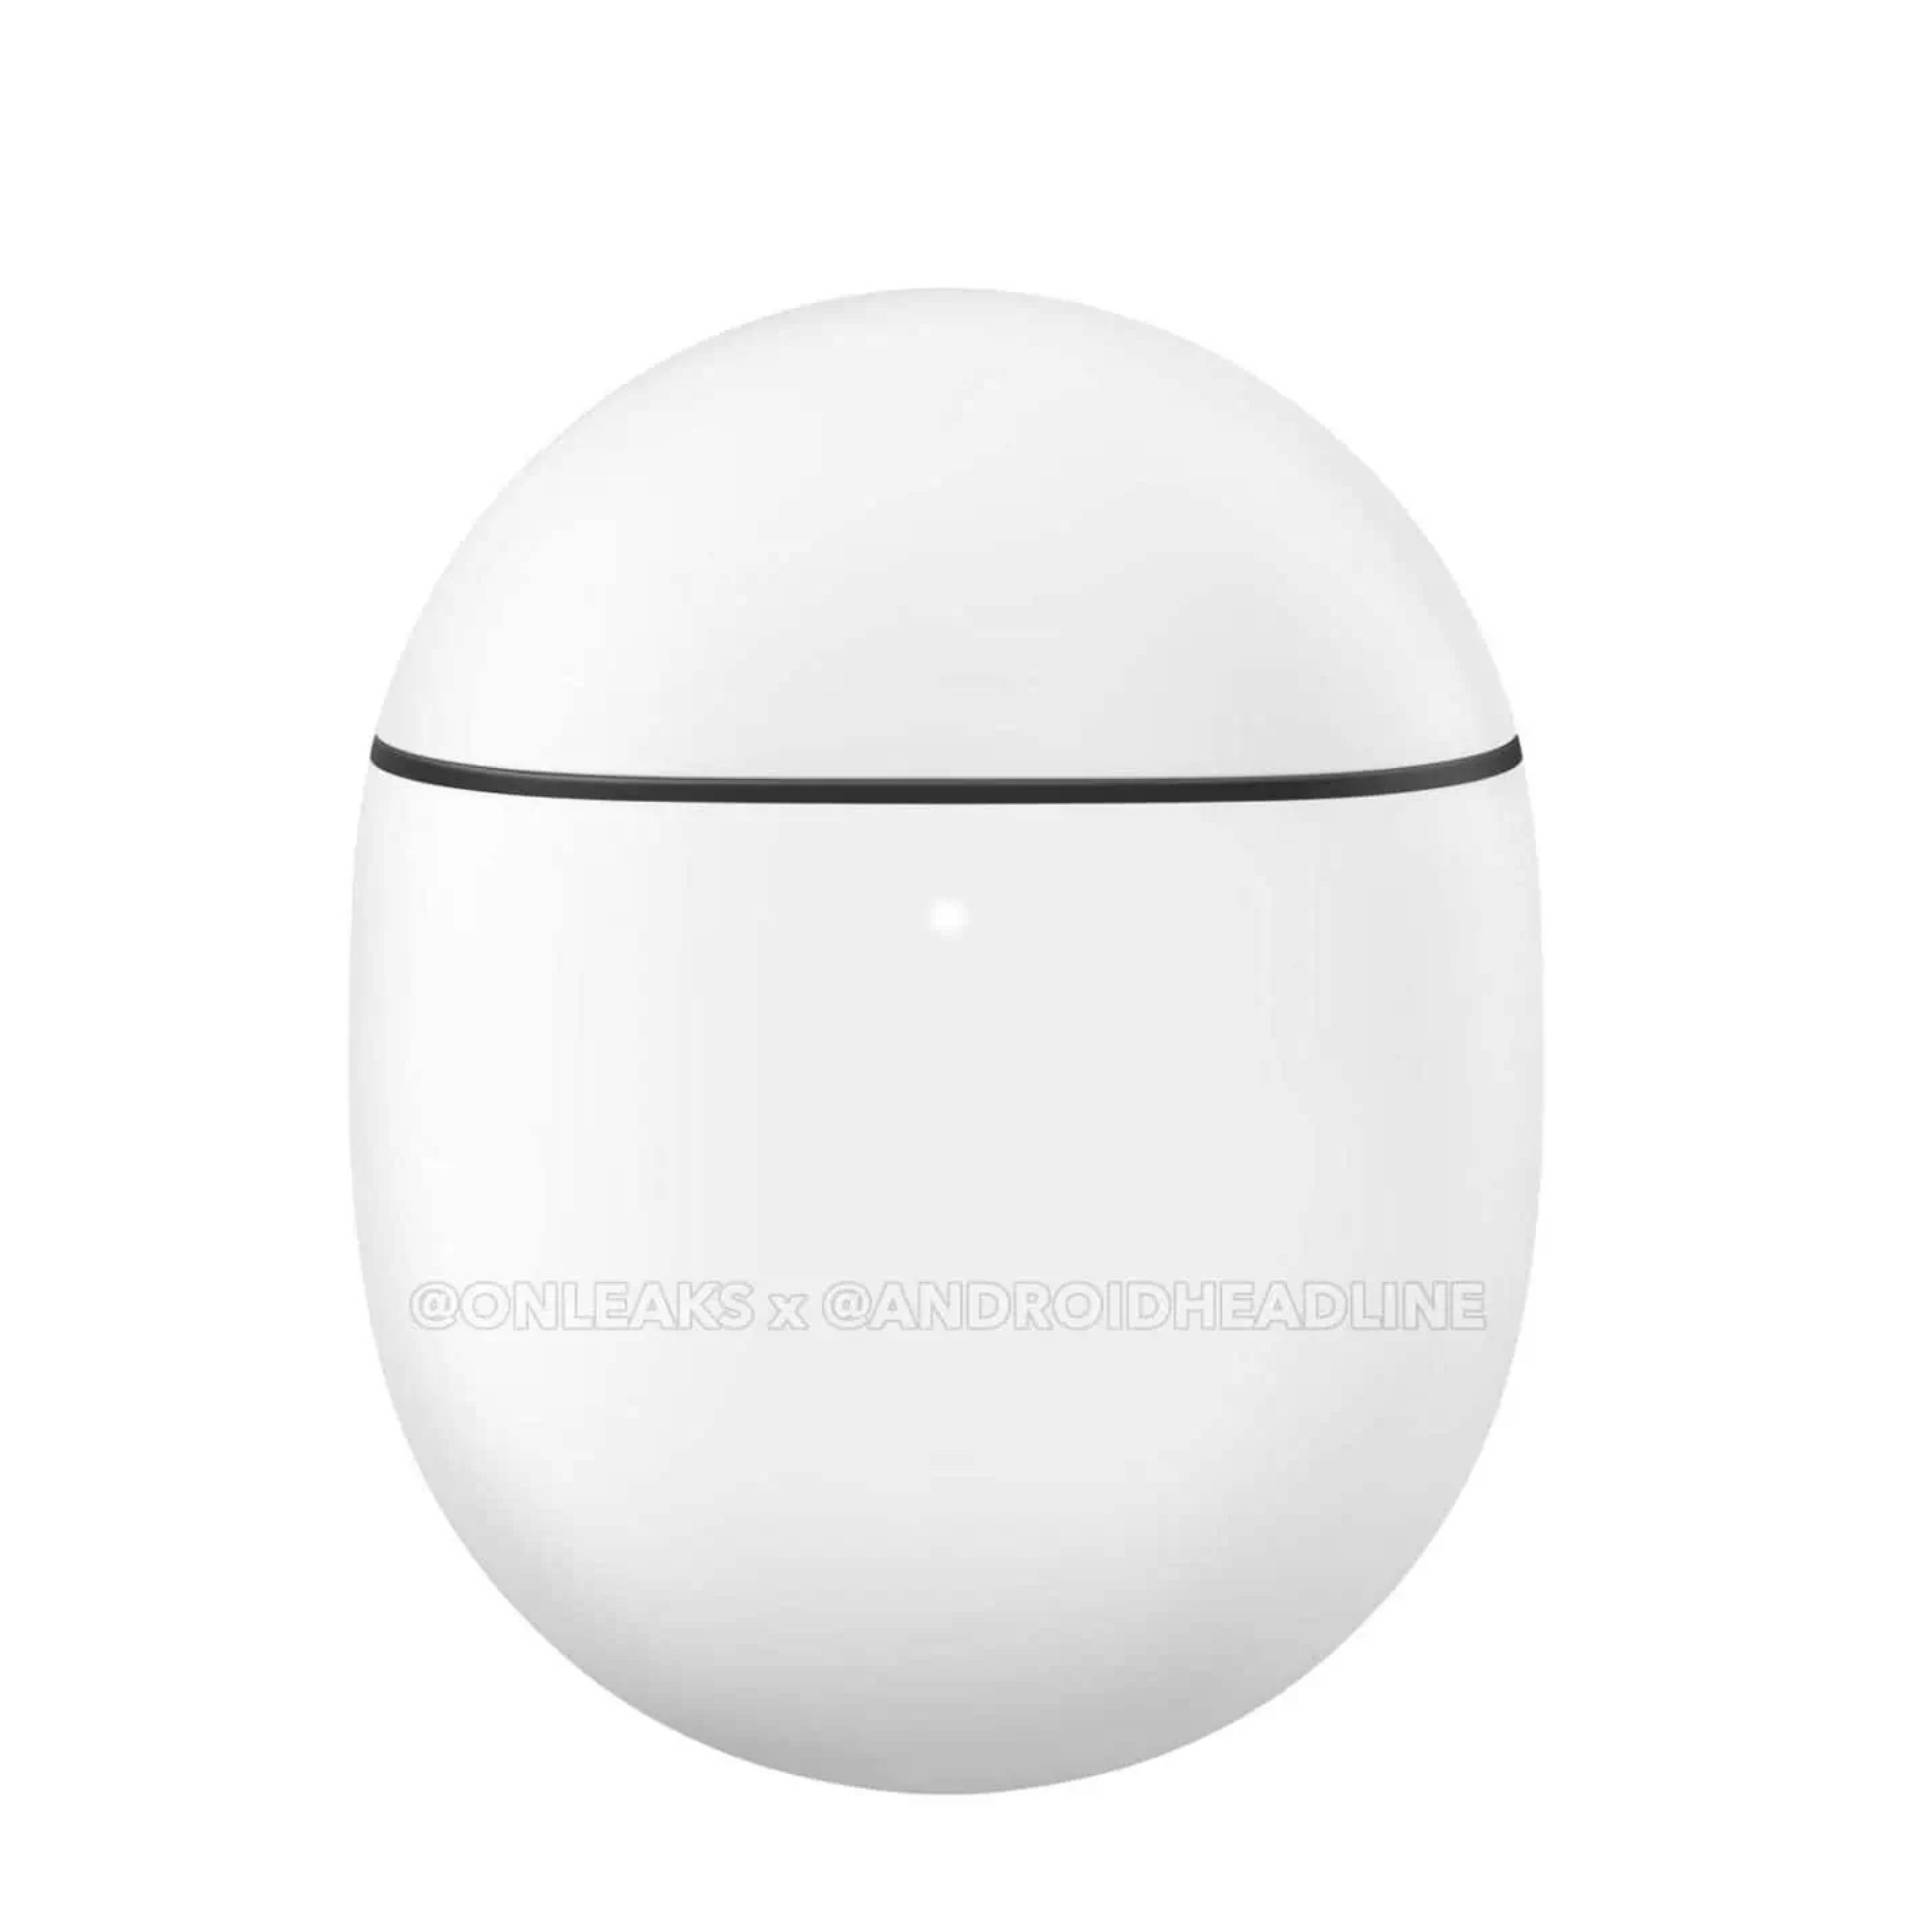 Leaked render of the Pixel Buds Pro 2 case on white background.